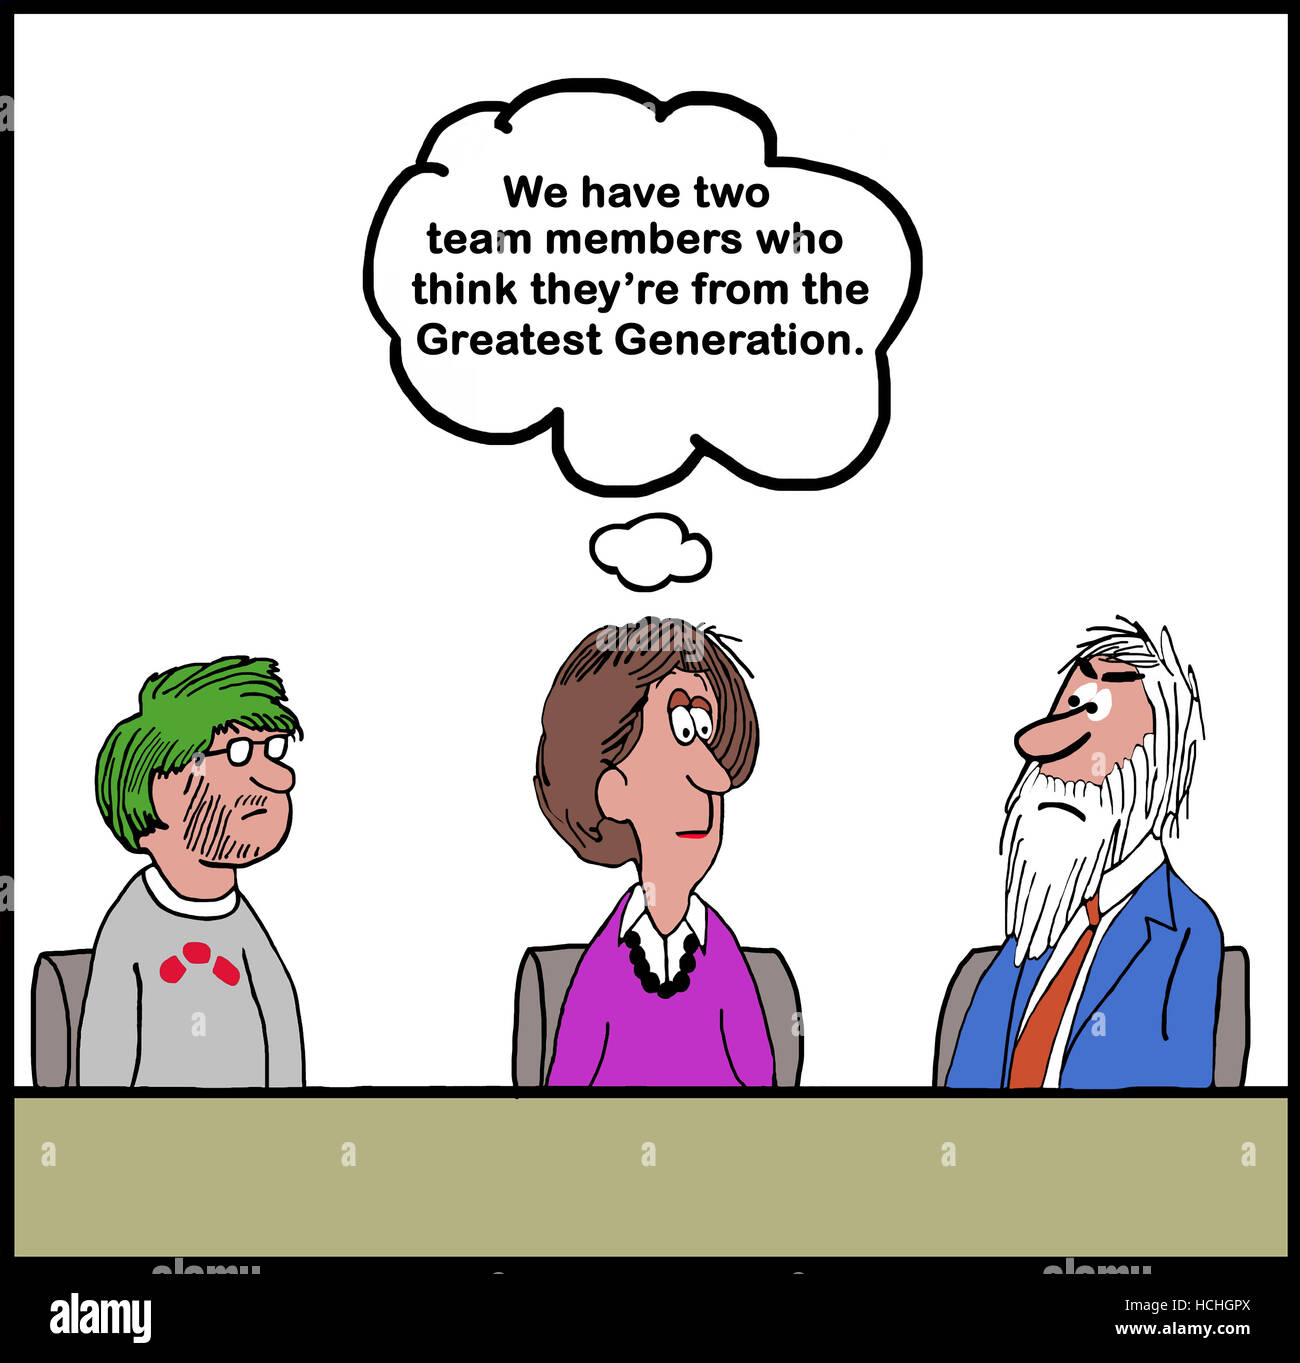 Color business cartoon about two very different people, both think they are from the Greatest Generation. Stock Photo